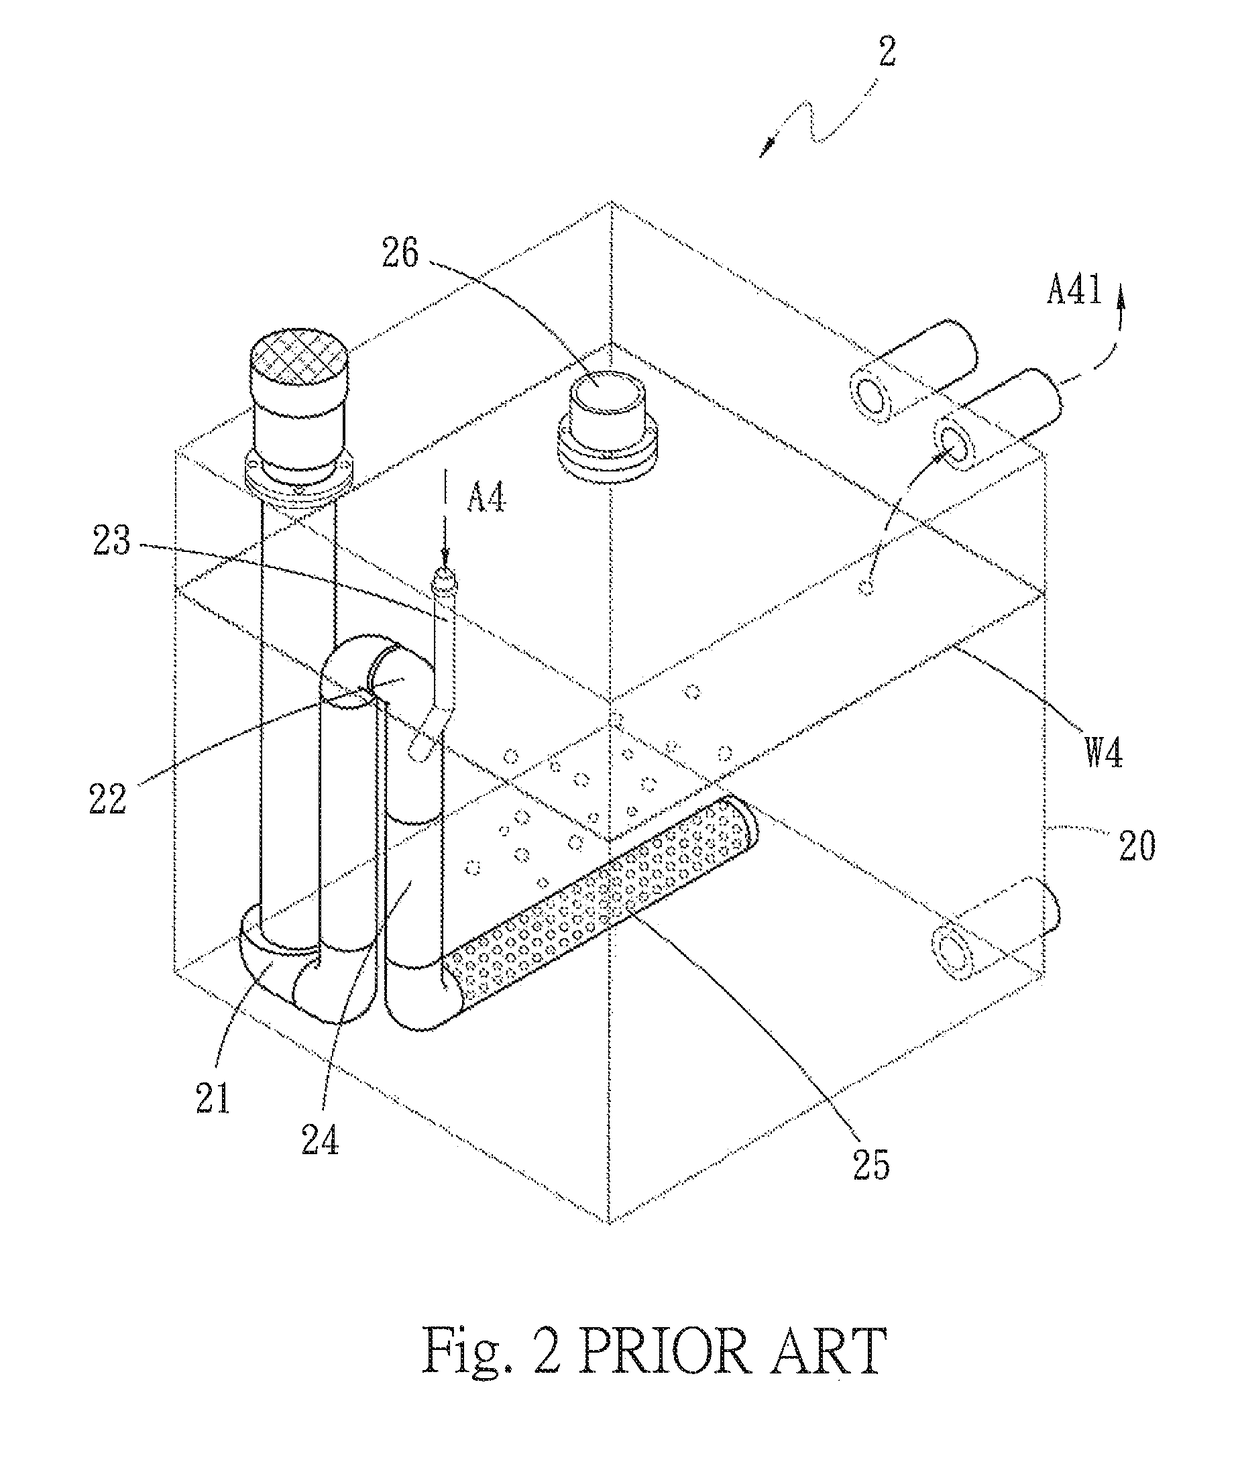 Air cleaning device using water as filter